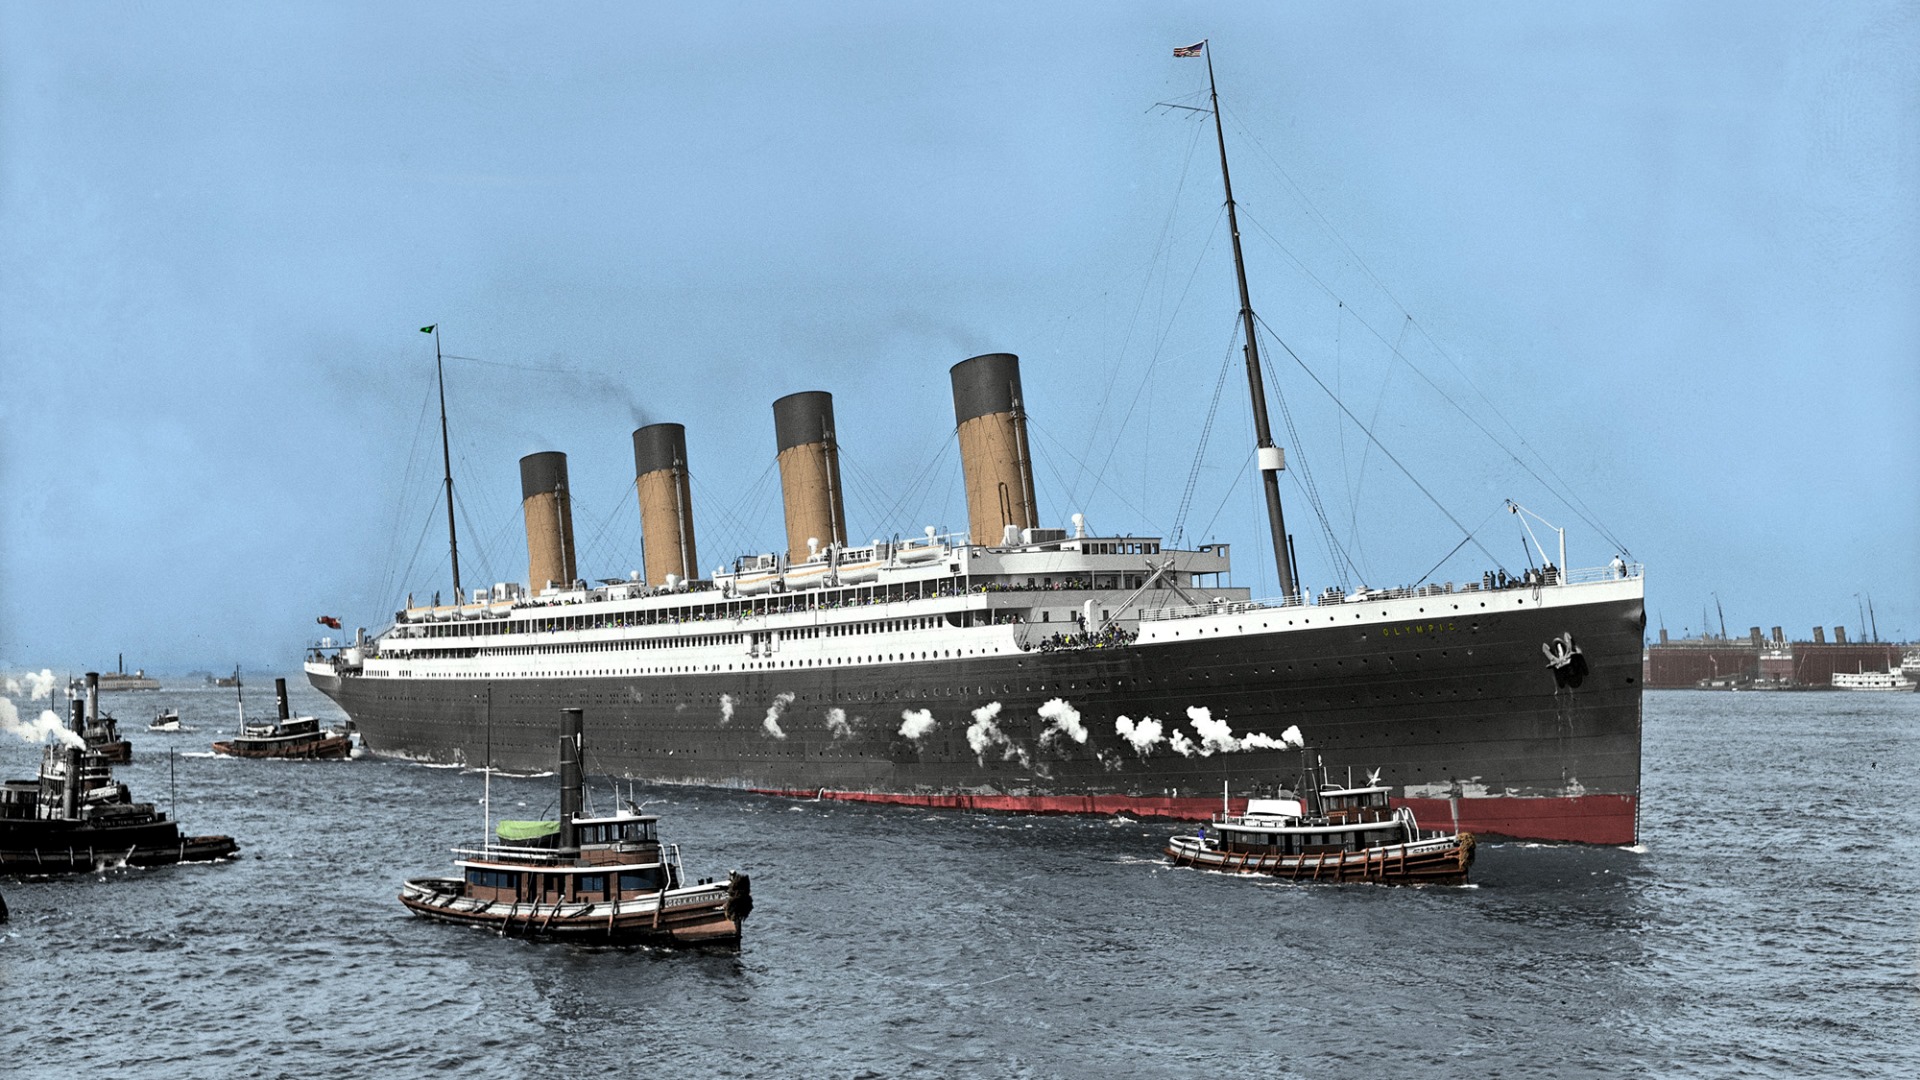 Vehicles RMS Olympic HD Wallpaper